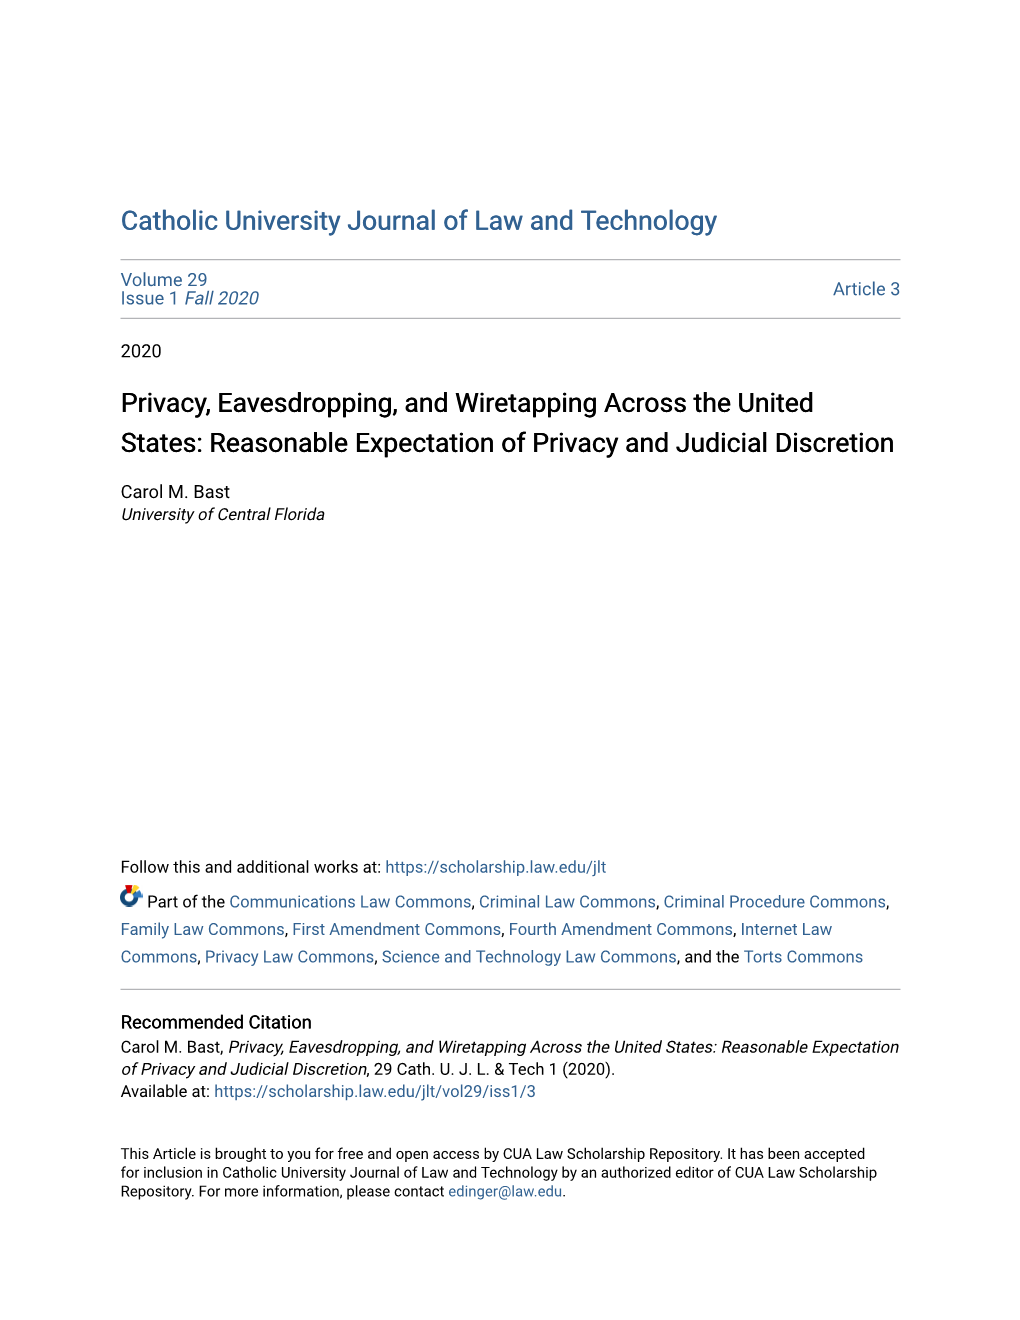 Privacy, Eavesdropping, and Wiretapping Across the United States: Reasonable Expectation of Privacy and Judicial Discretion